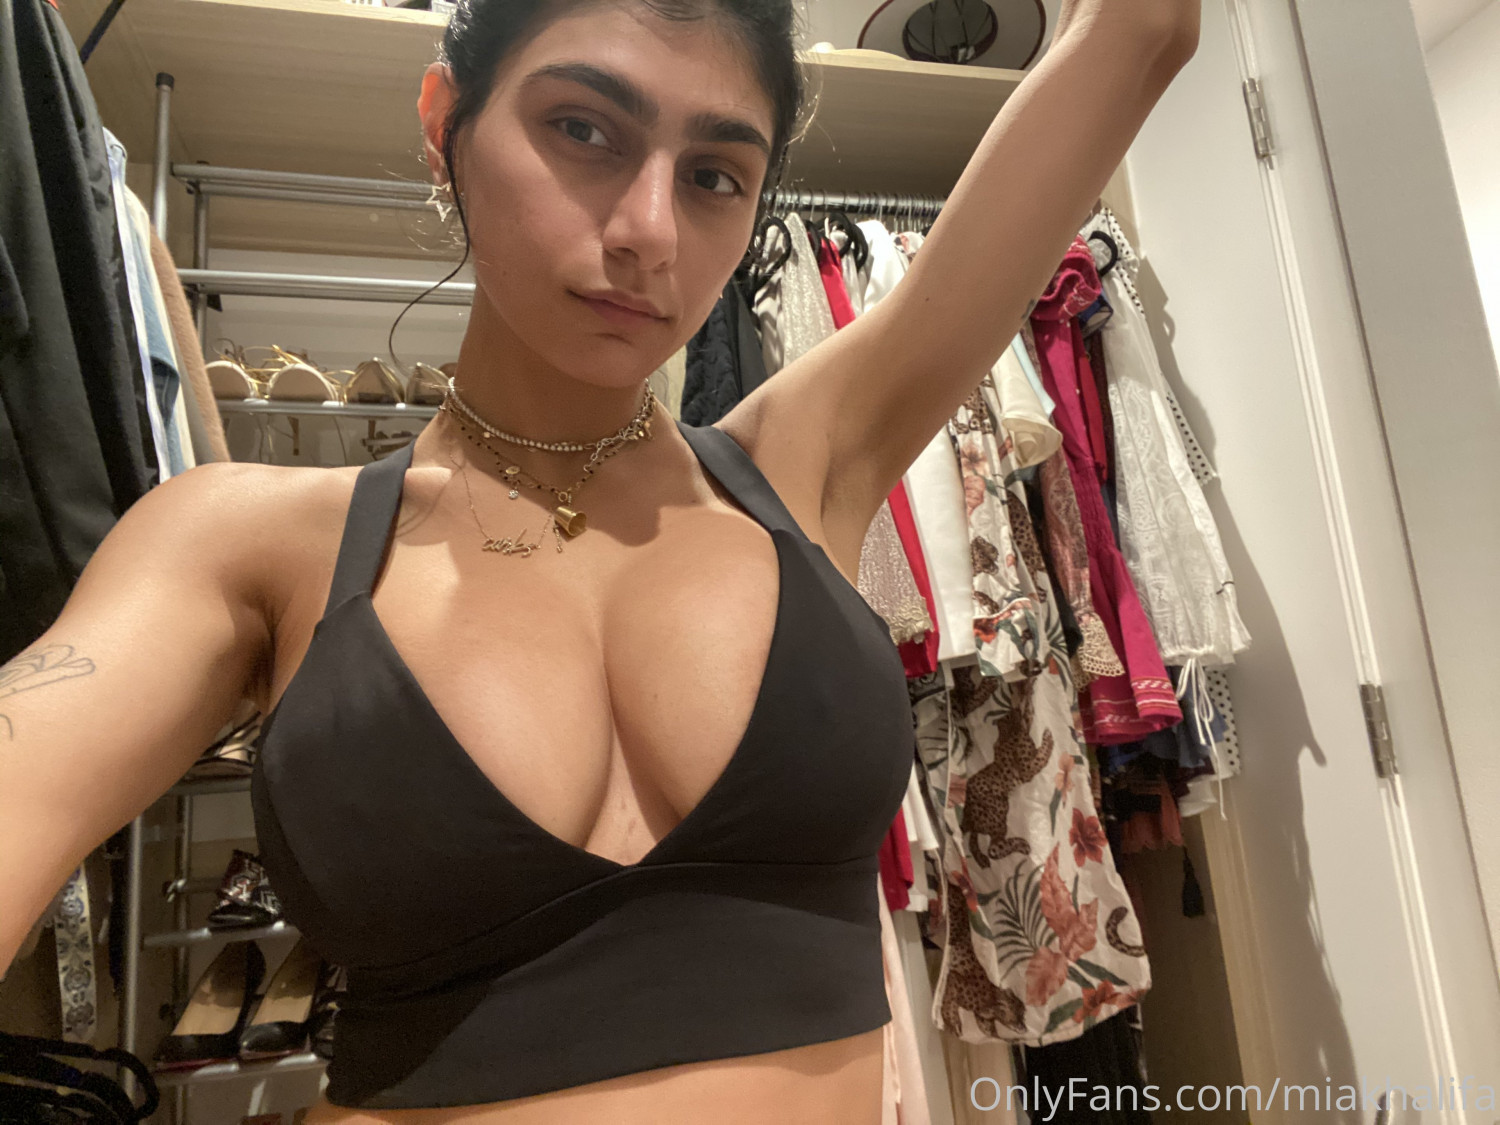 Today Mia Khalifa Onlyfans Forums